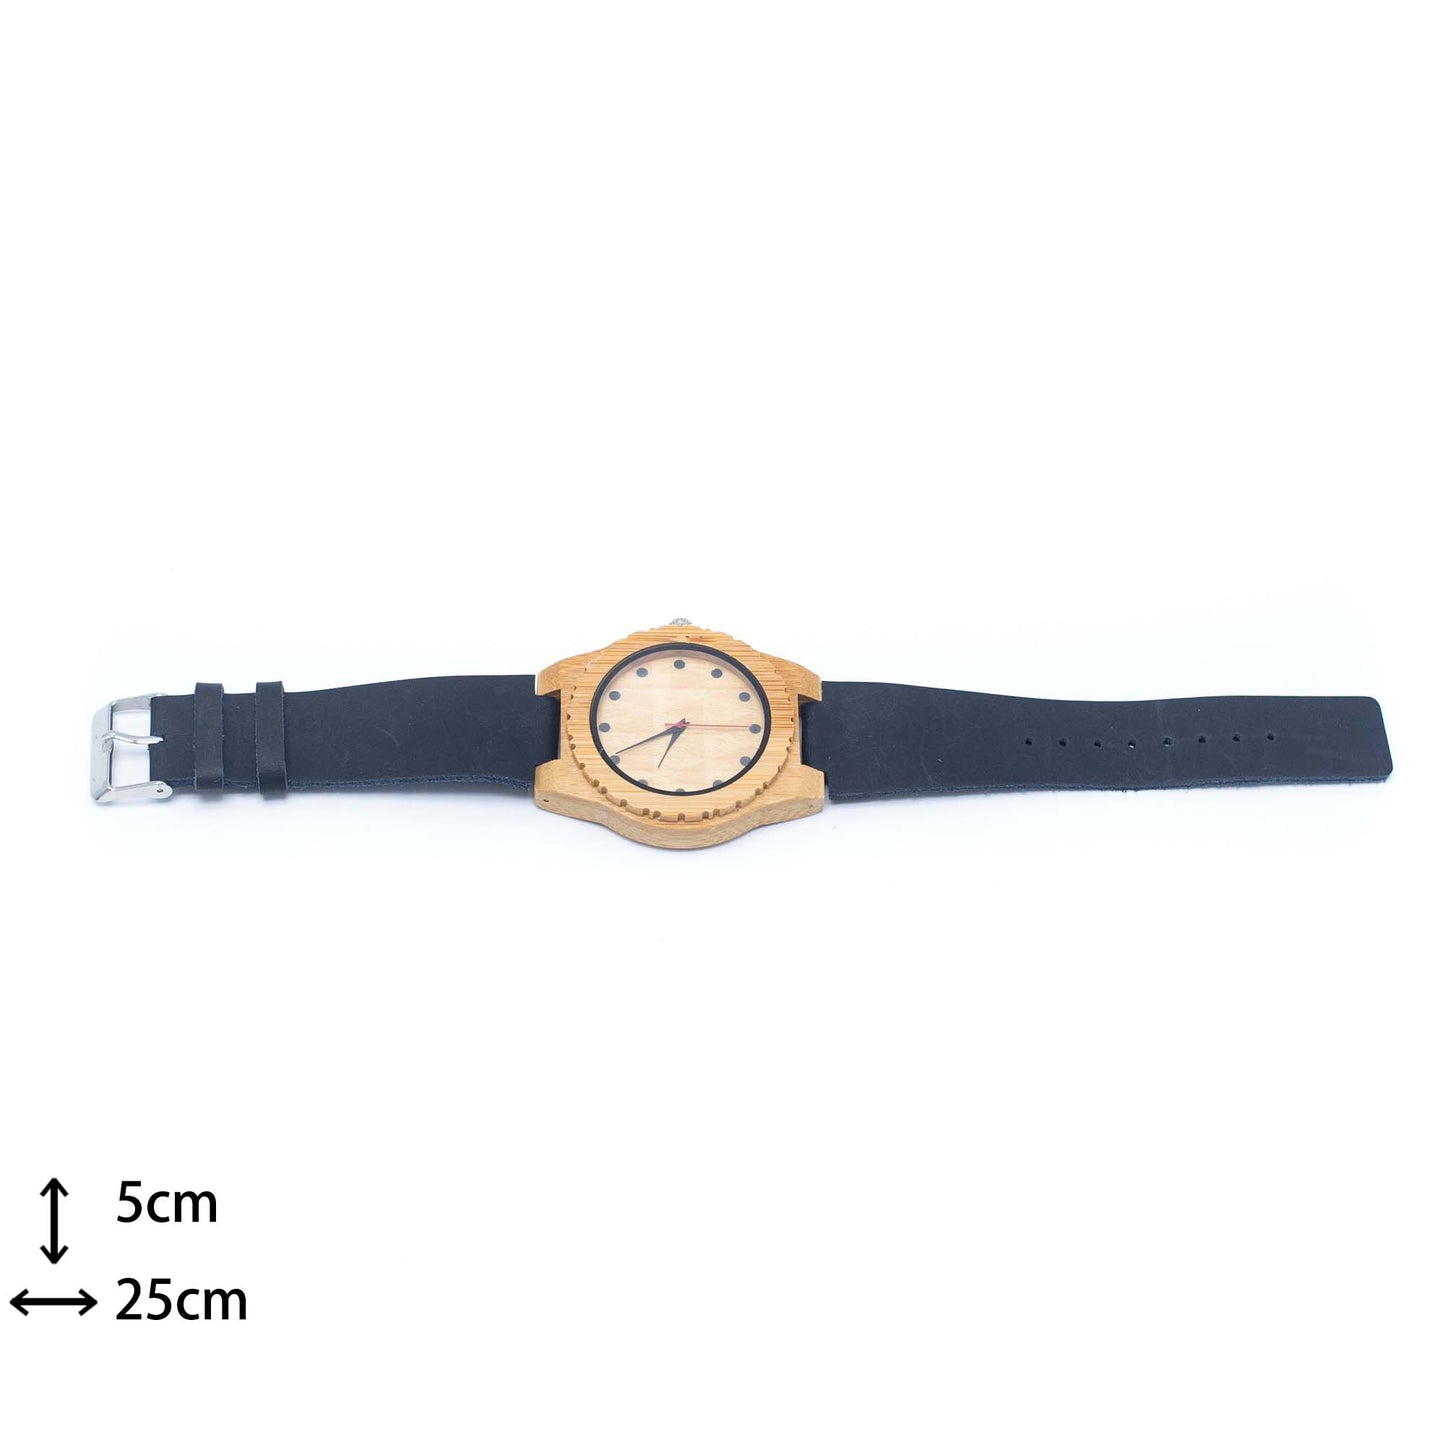 Men's Eco Bamboo Watch w/ Natural Leather Strap | THE CORK COLLECTION